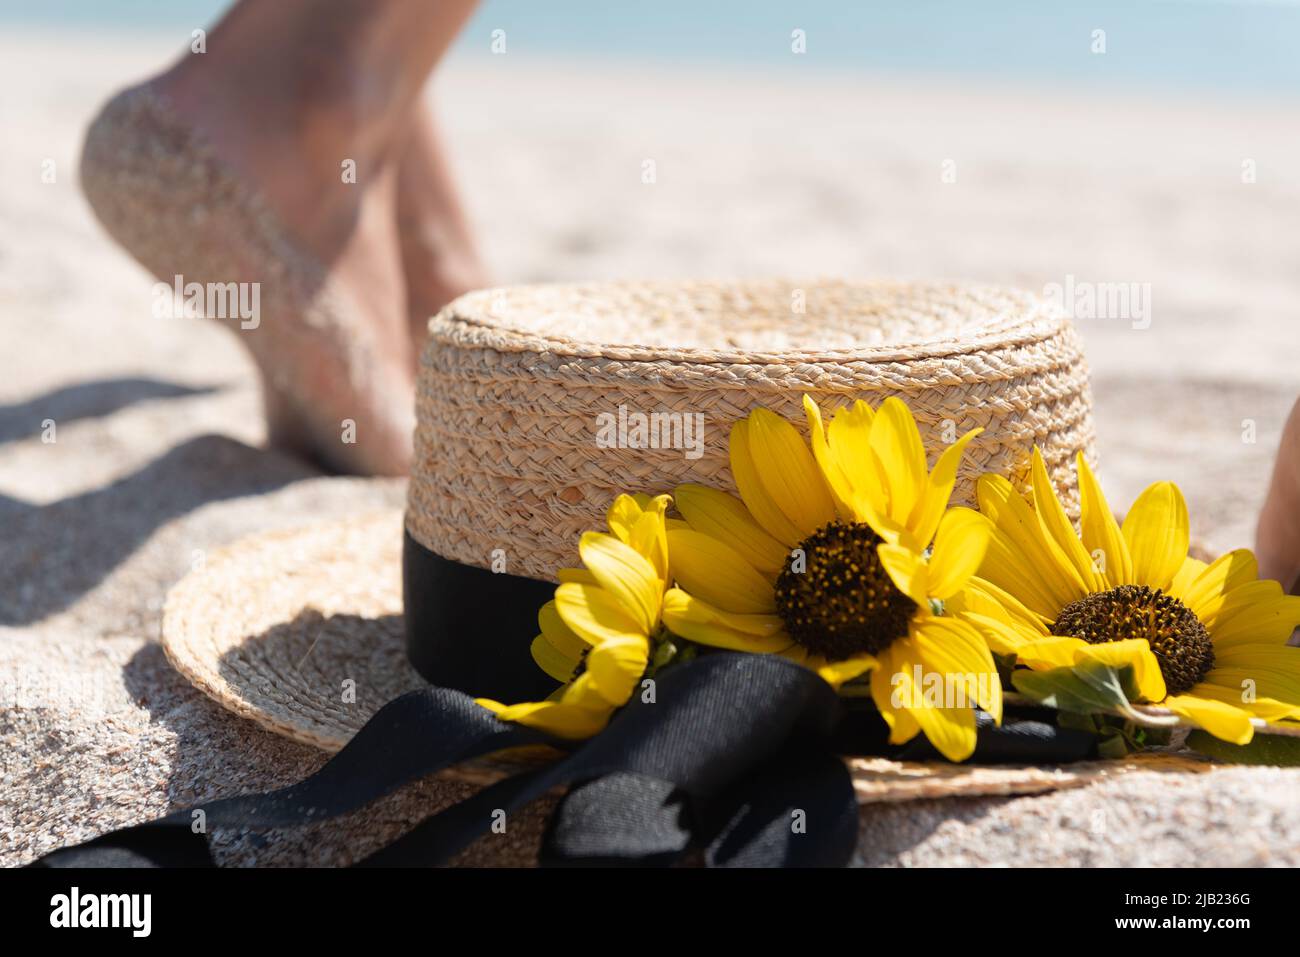 Blurred legs of a woman walking on the beach sand in the background with a straw hat and flowers close-up. Summer rest concept. Stock Photo